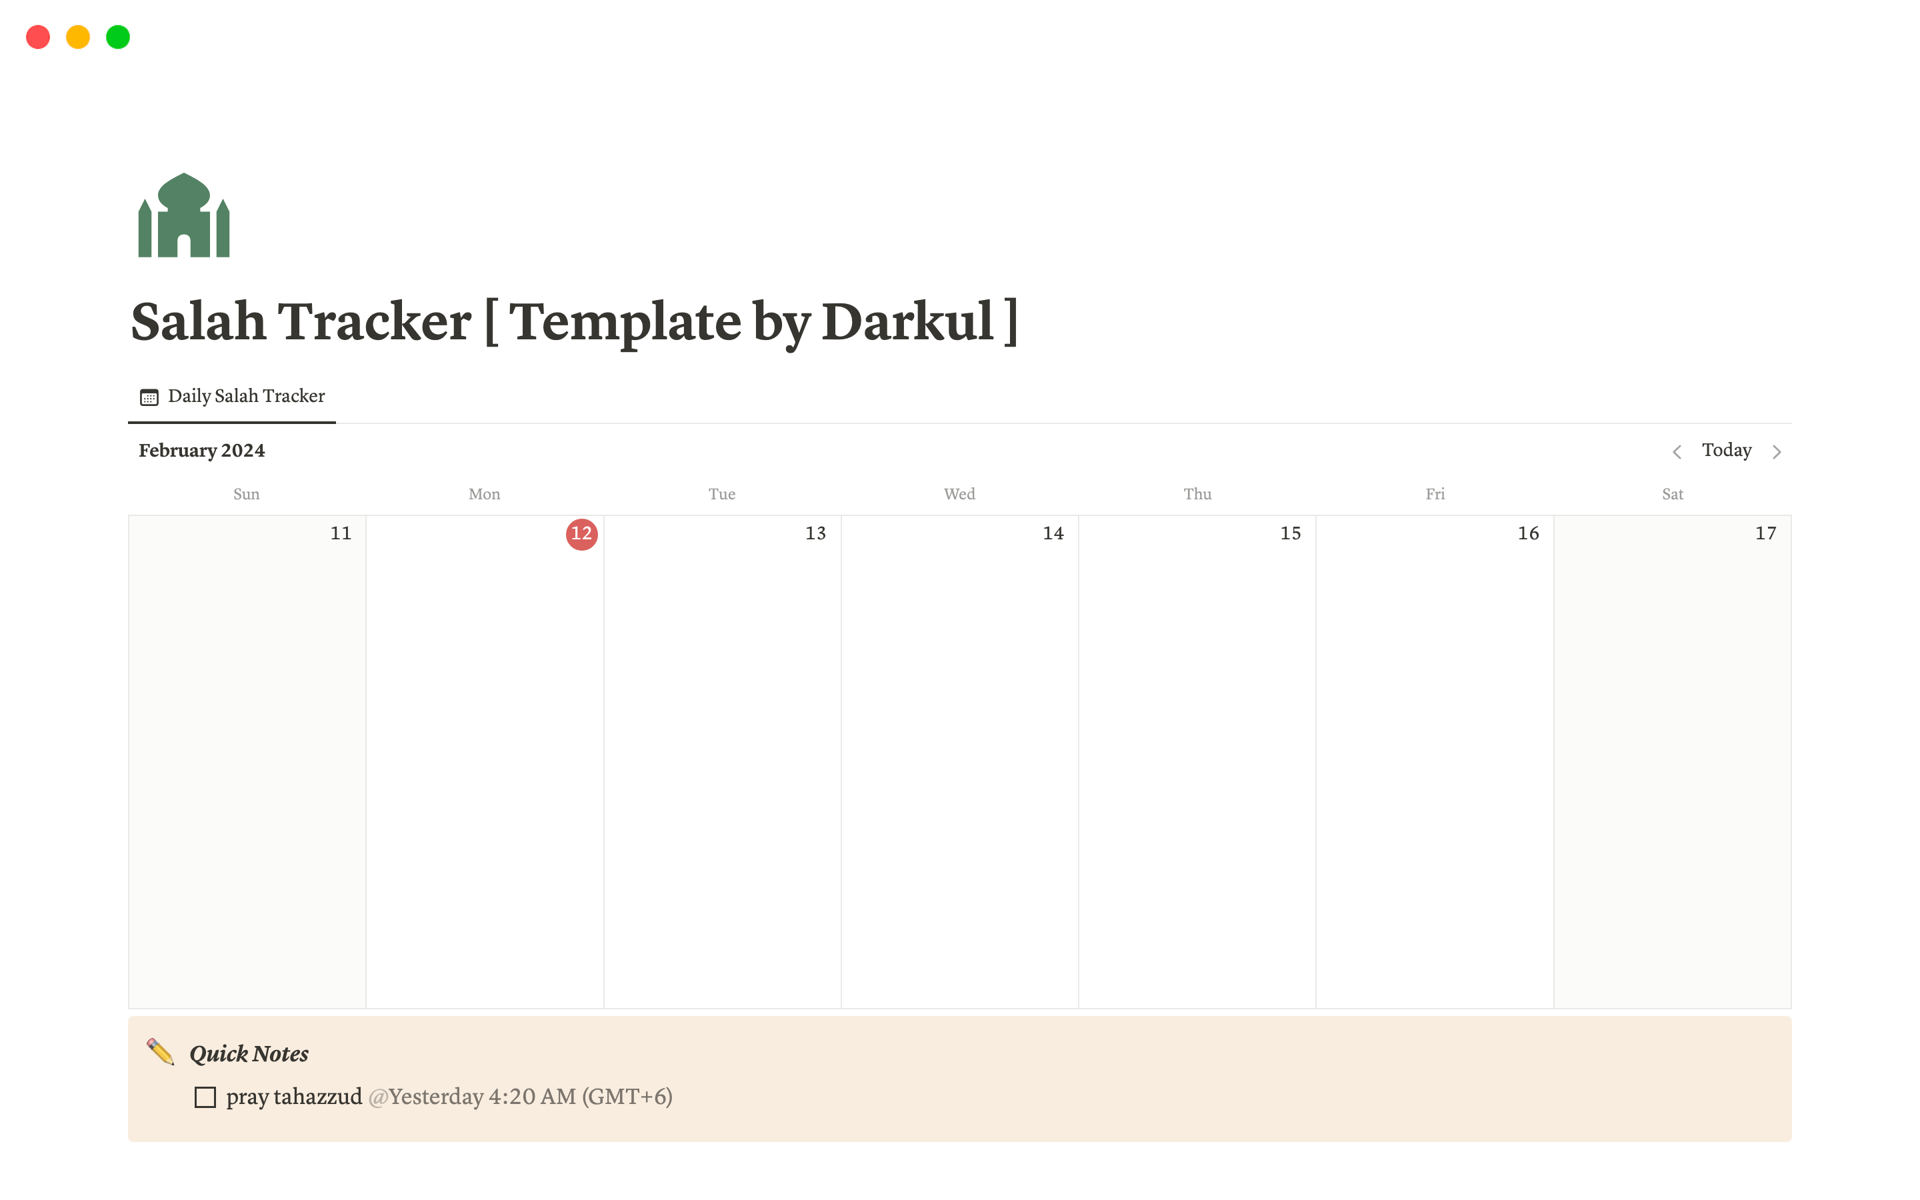 This template facilitates daily salah tracking, covering Tahajjud, Fajr, and Isha prayers. It features a visually appealing progress bar where you can mark completed salah by clicking on them.I may customize this template further and improve it. 